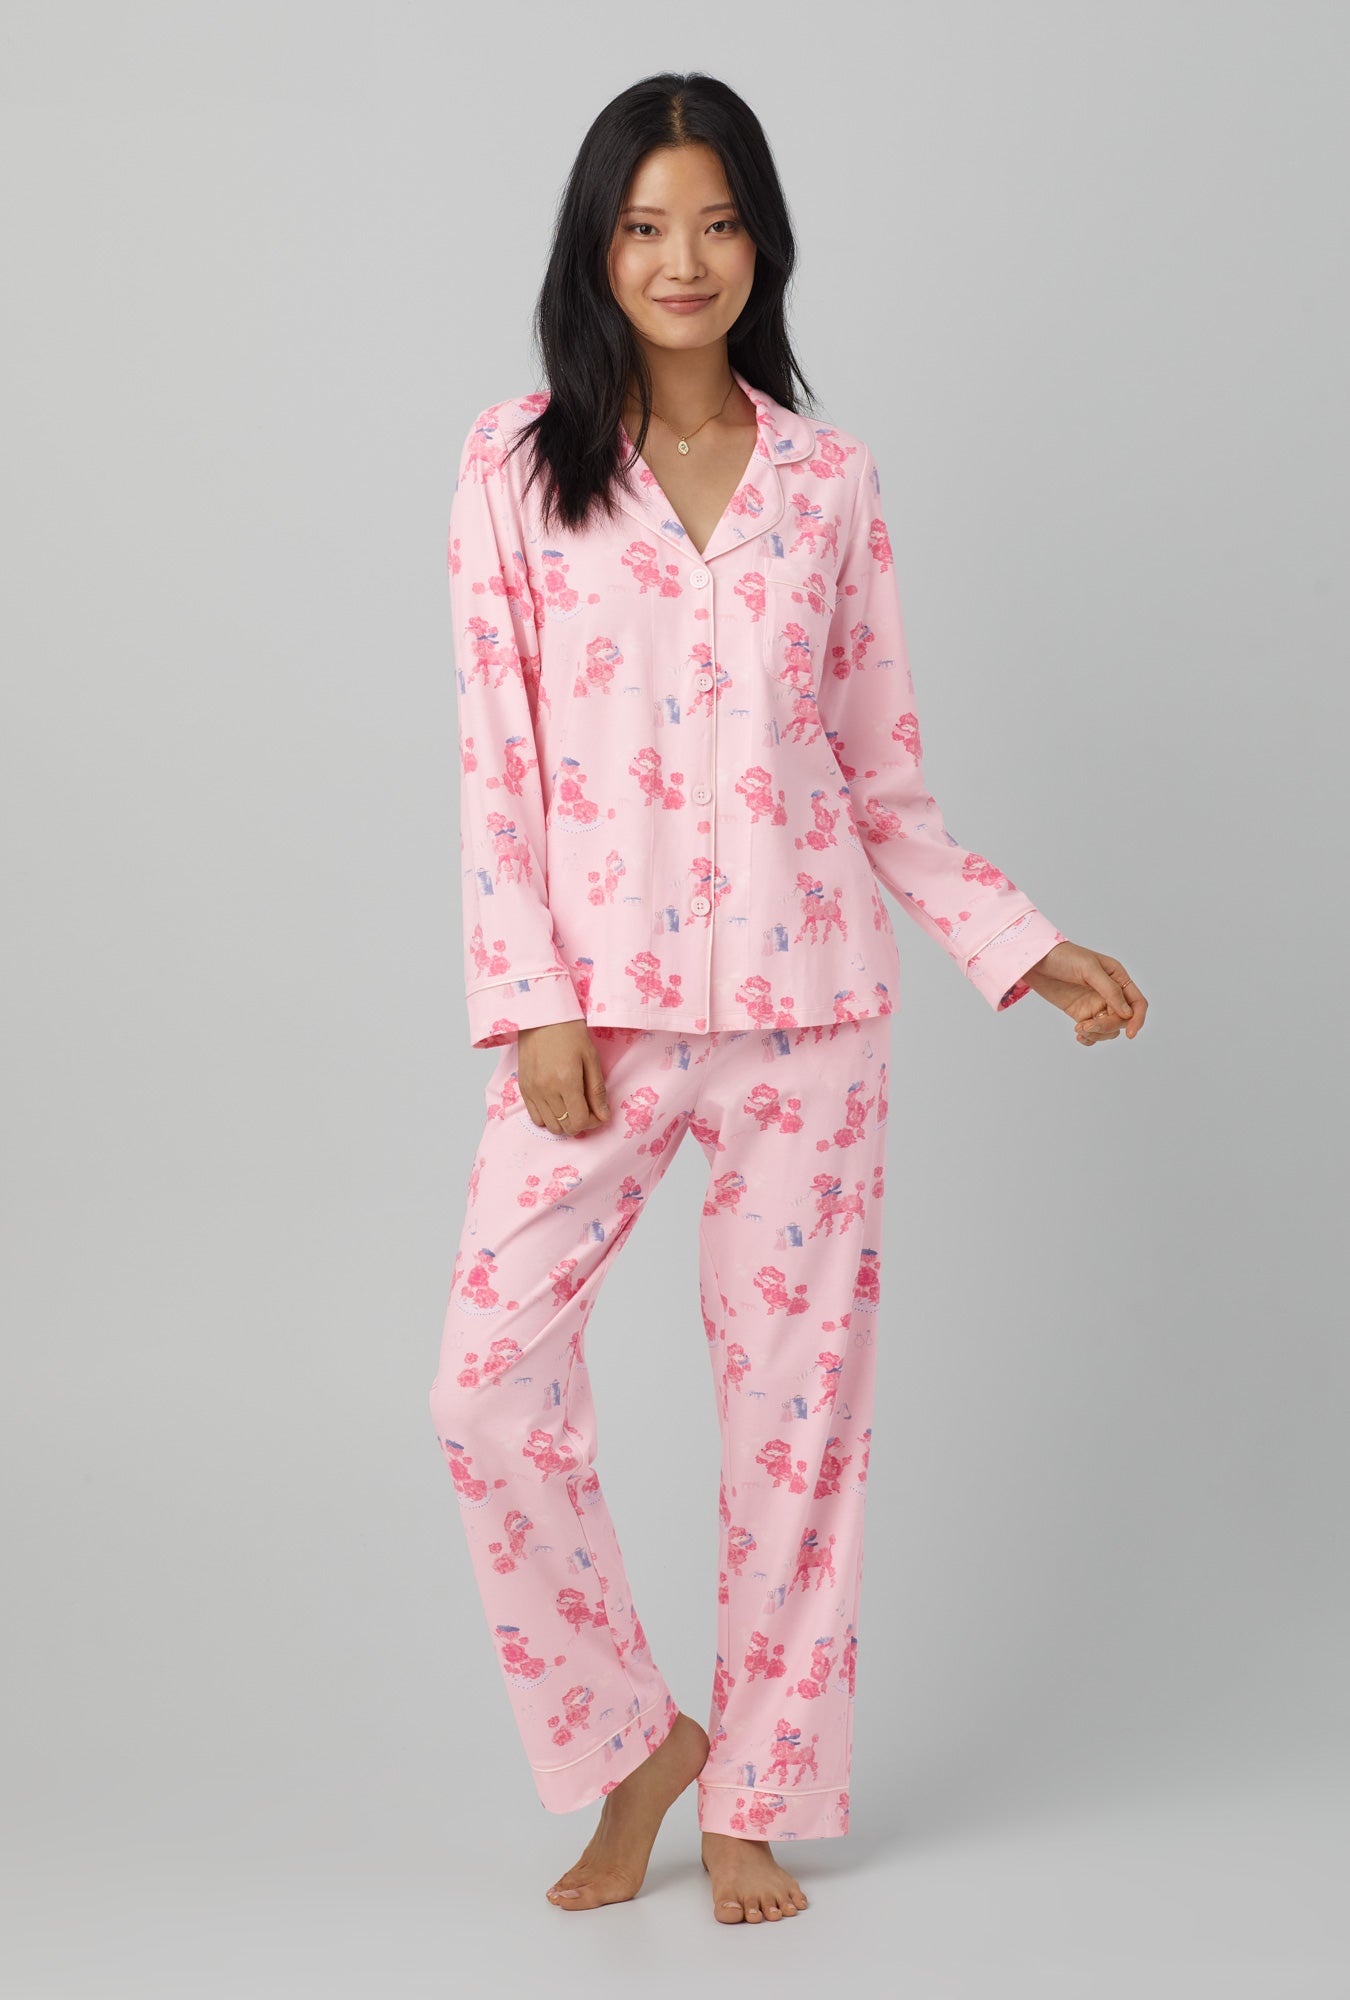 A lady wearing Pink Long Sleeve Classic Stretch Jersey PJ Set with Pampered Poodles  print